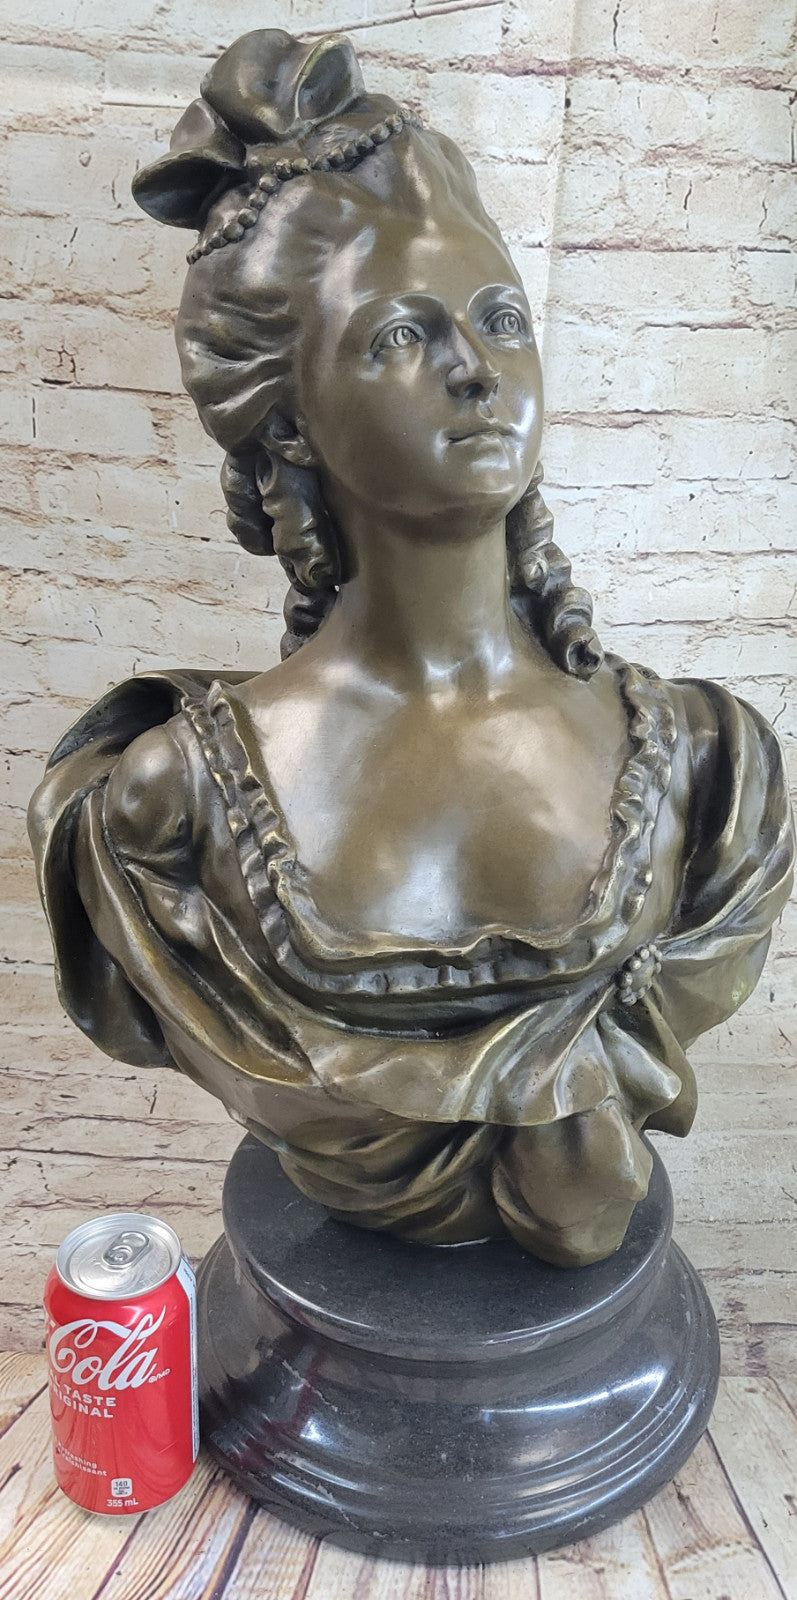 Vintage Oversized Parian Bust of Marie Antoinette after Gerome French Artist